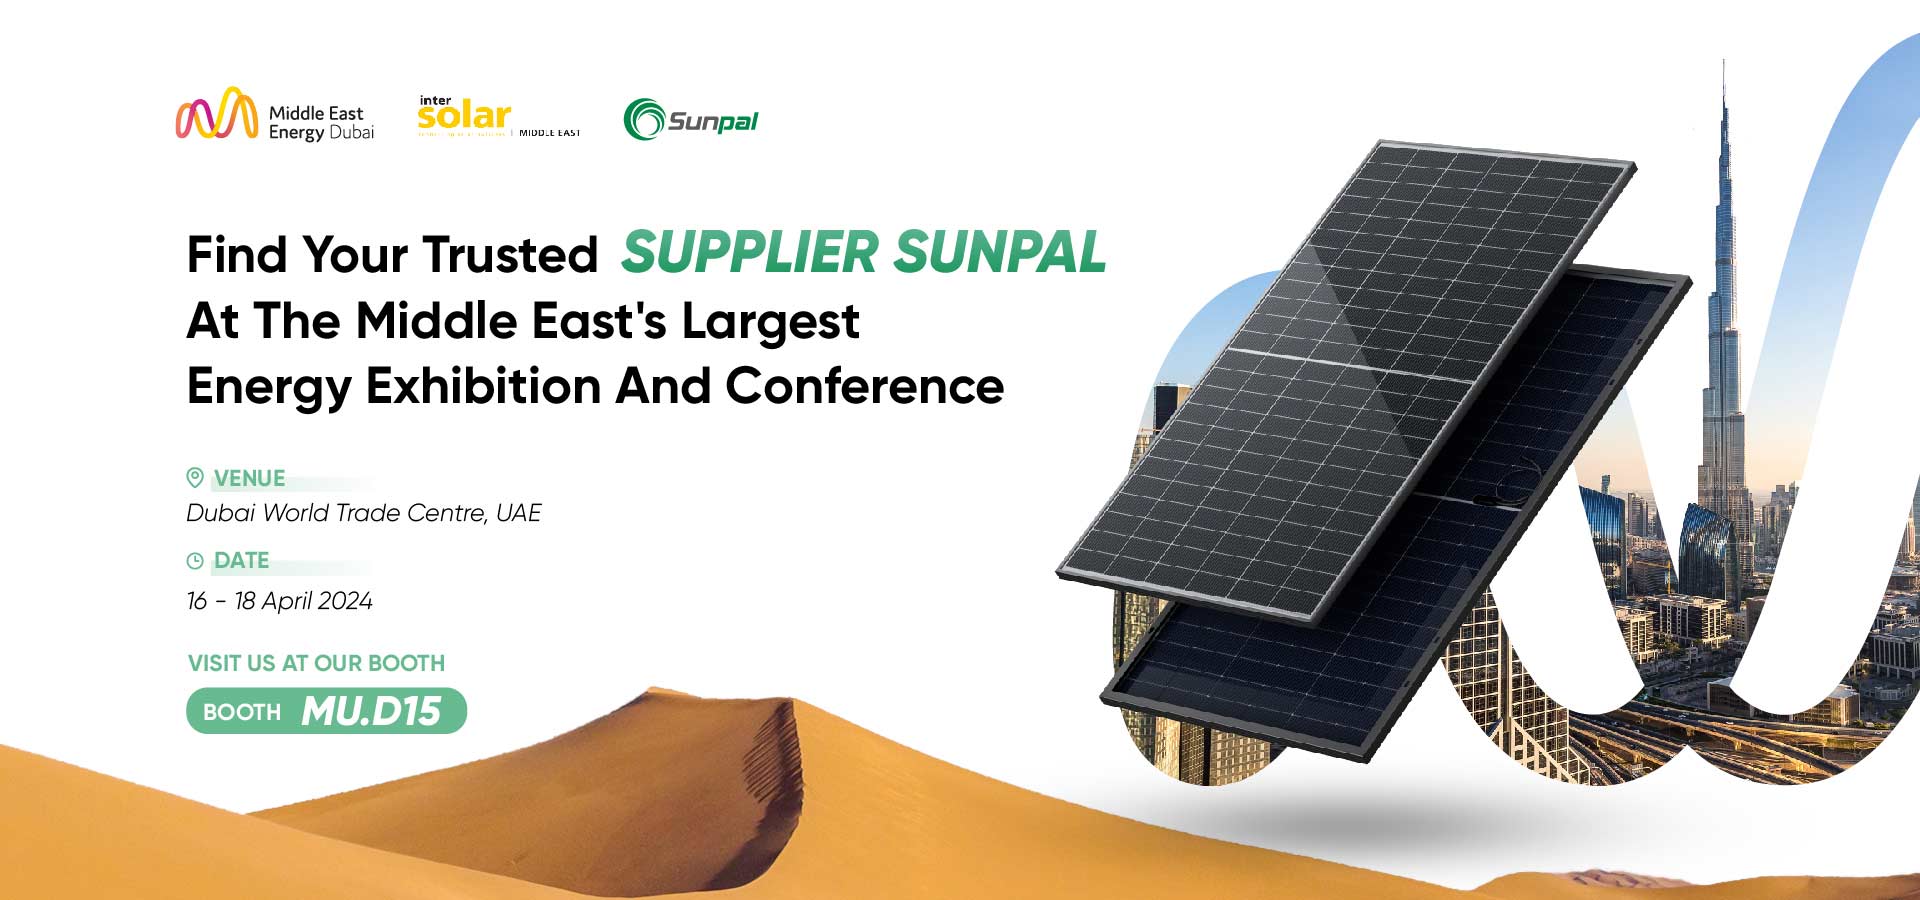 Visit Us At InterSolar Middle East on April 16 to 18 2024